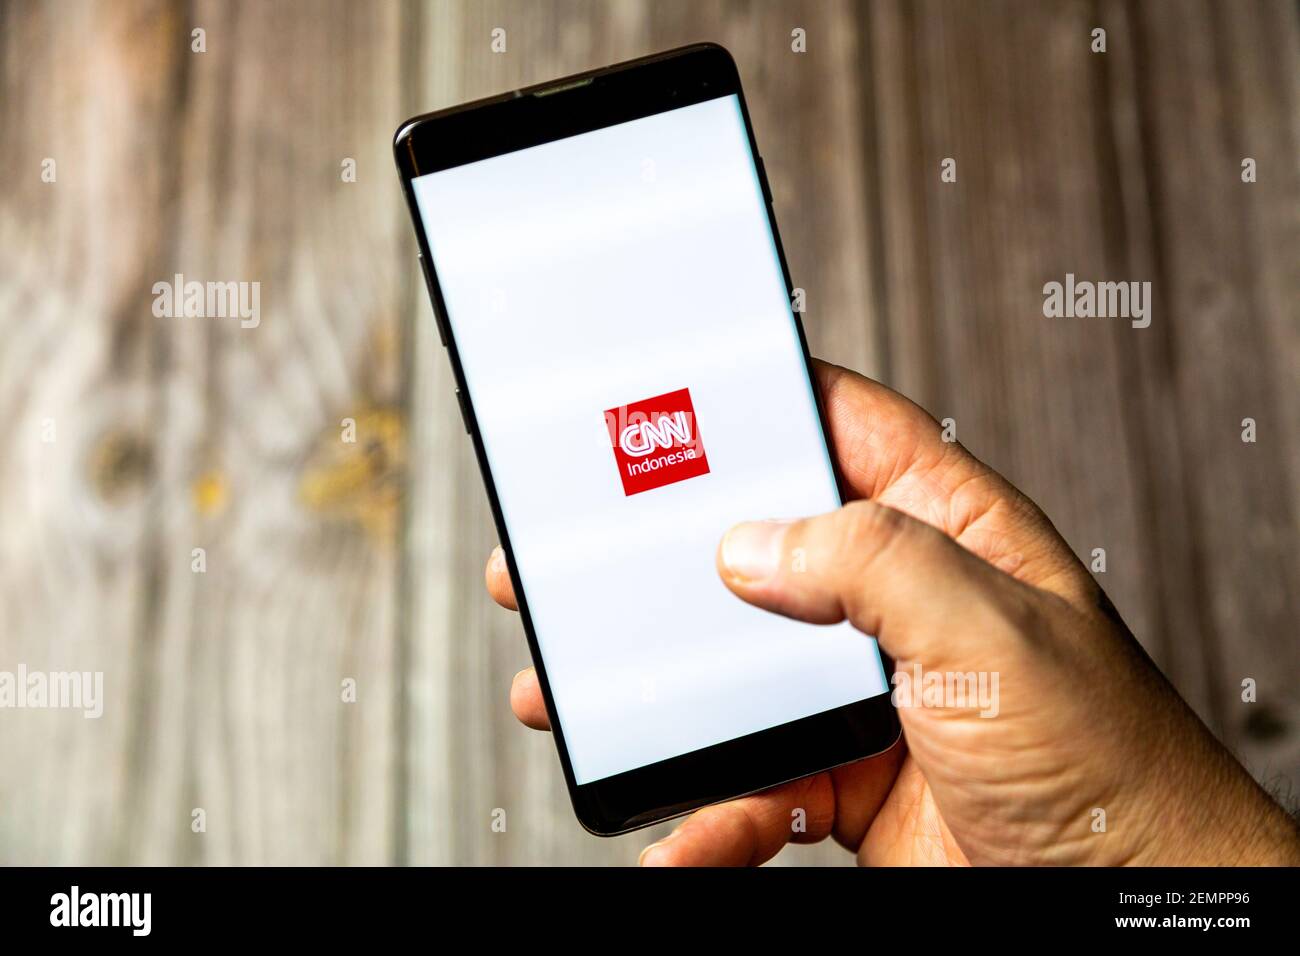 A mobile phone or cell phone being held by a hand with the CNN Indonesia app open on screen Stock Photo